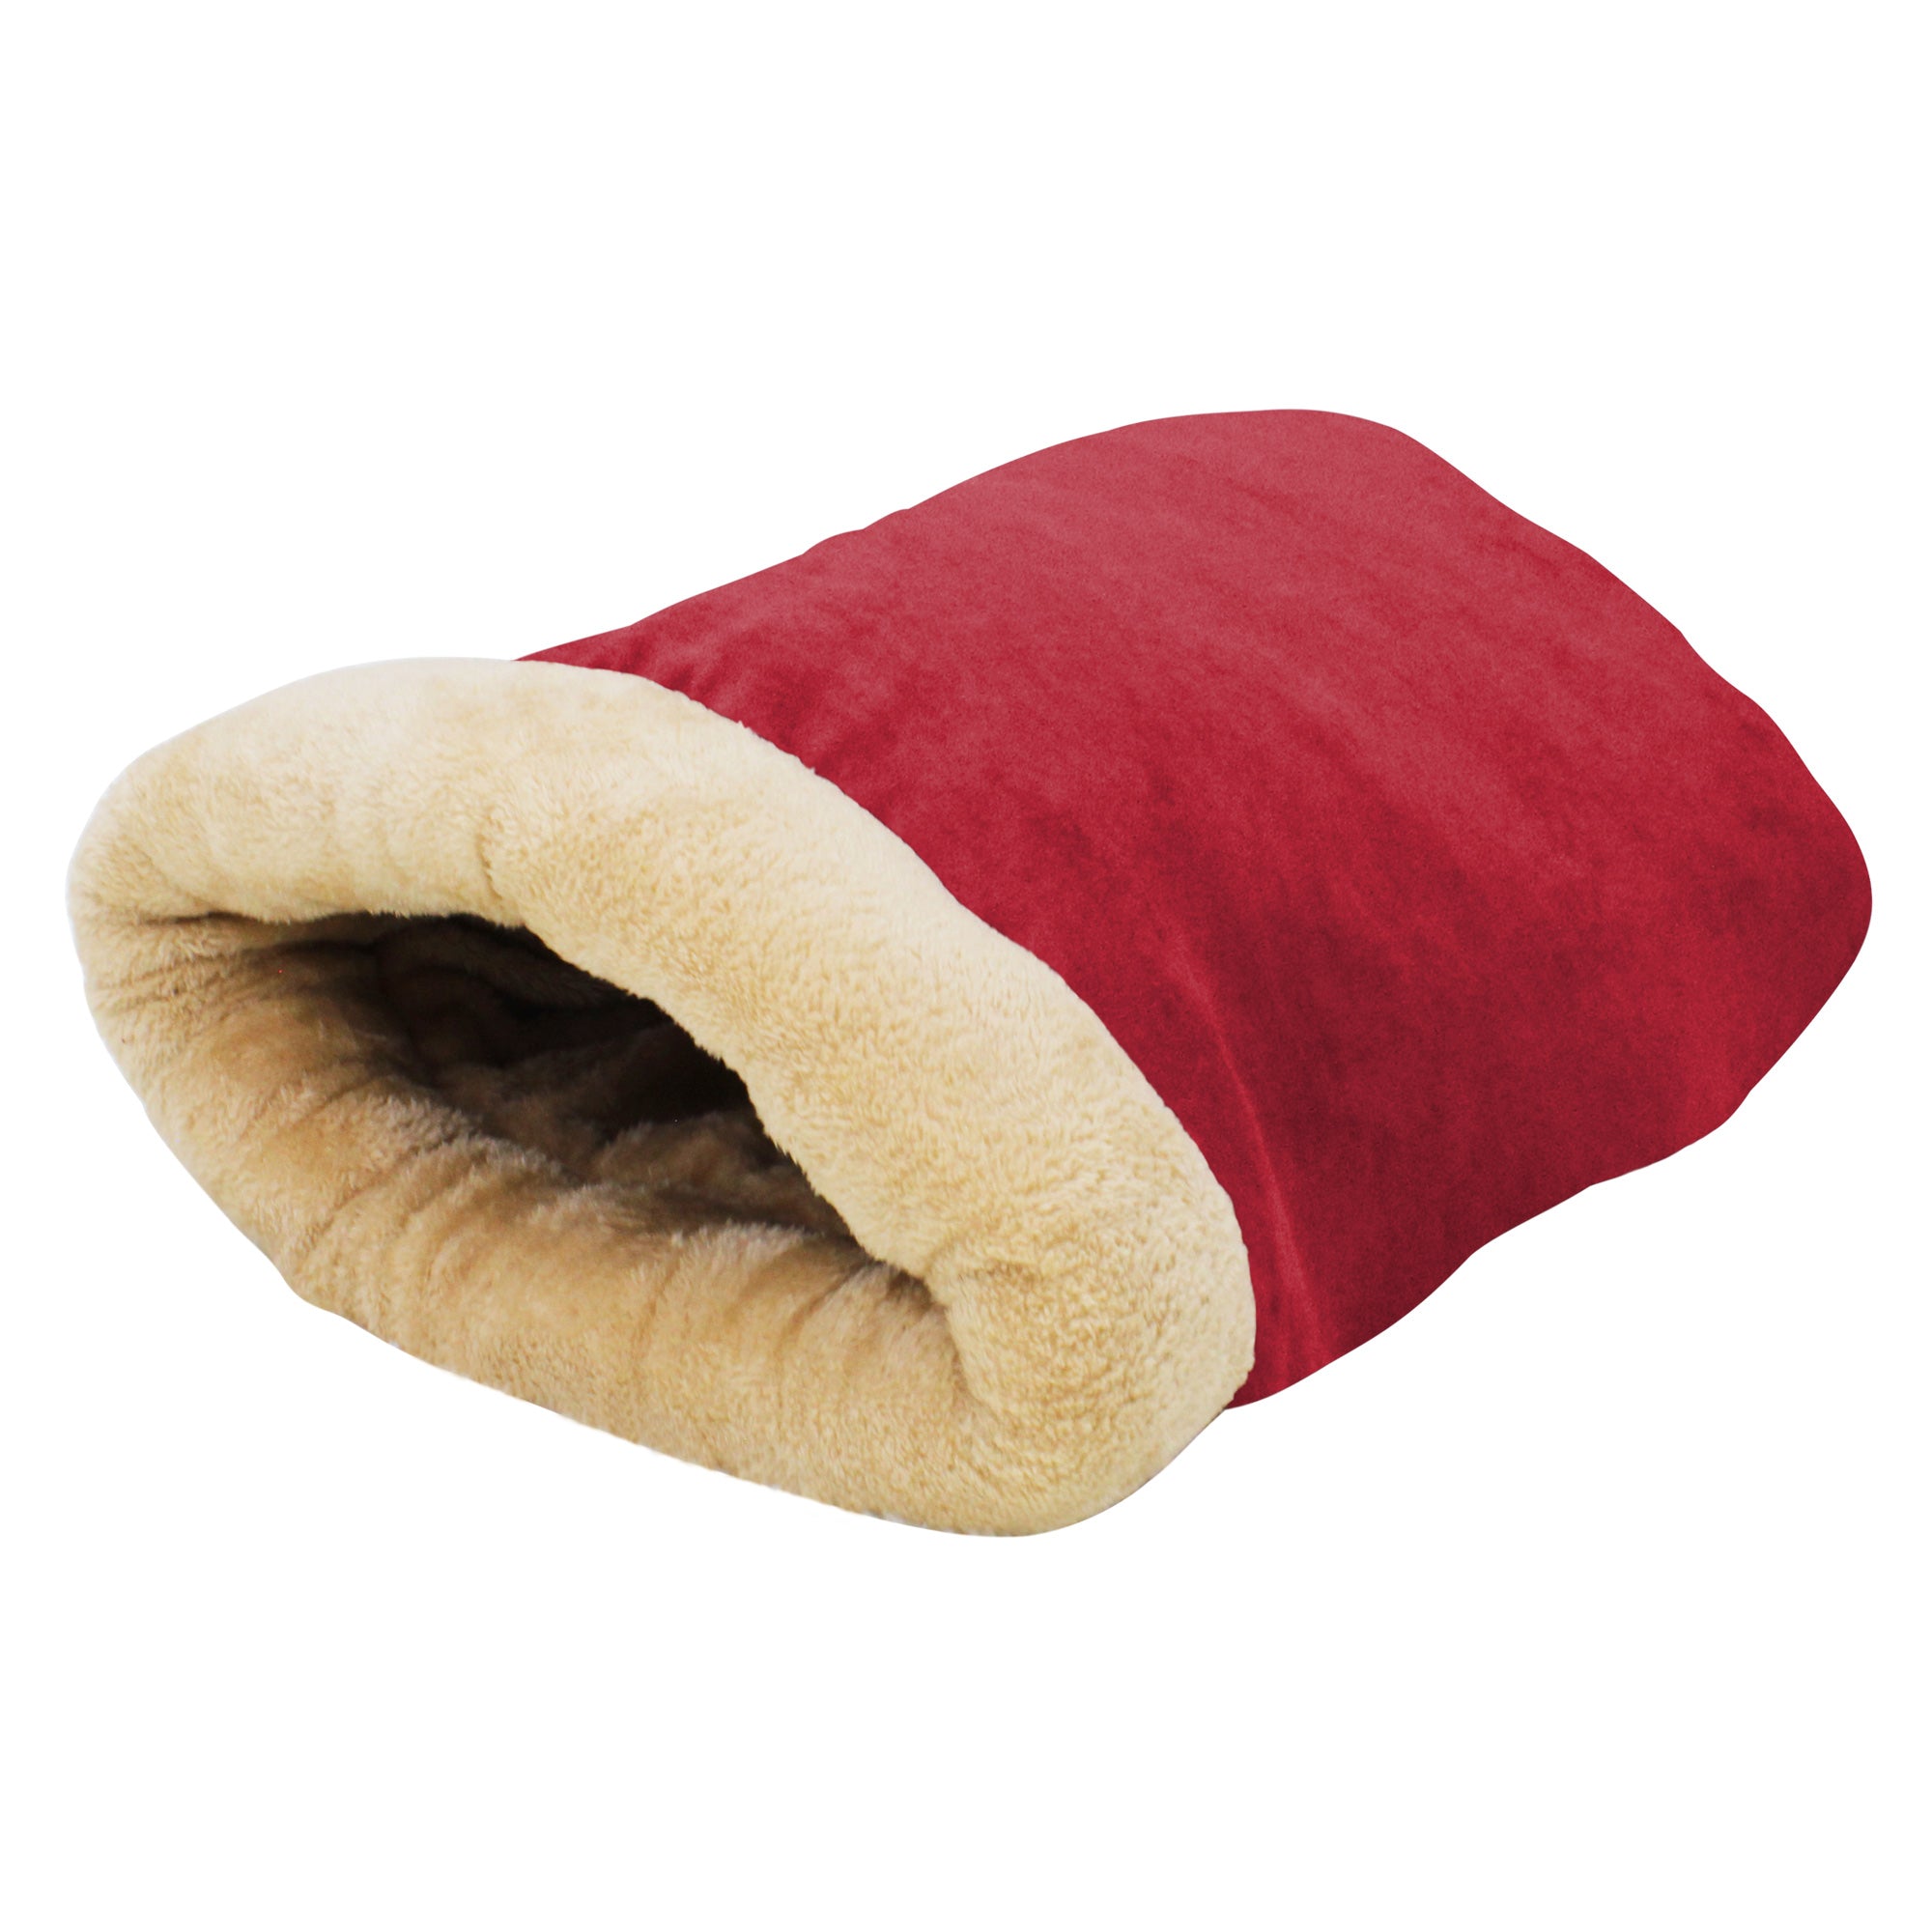 GOOPAWS 4 in 1 Self Warming Burrow Cat Bed Pet Cuddle Cave, Burgundy